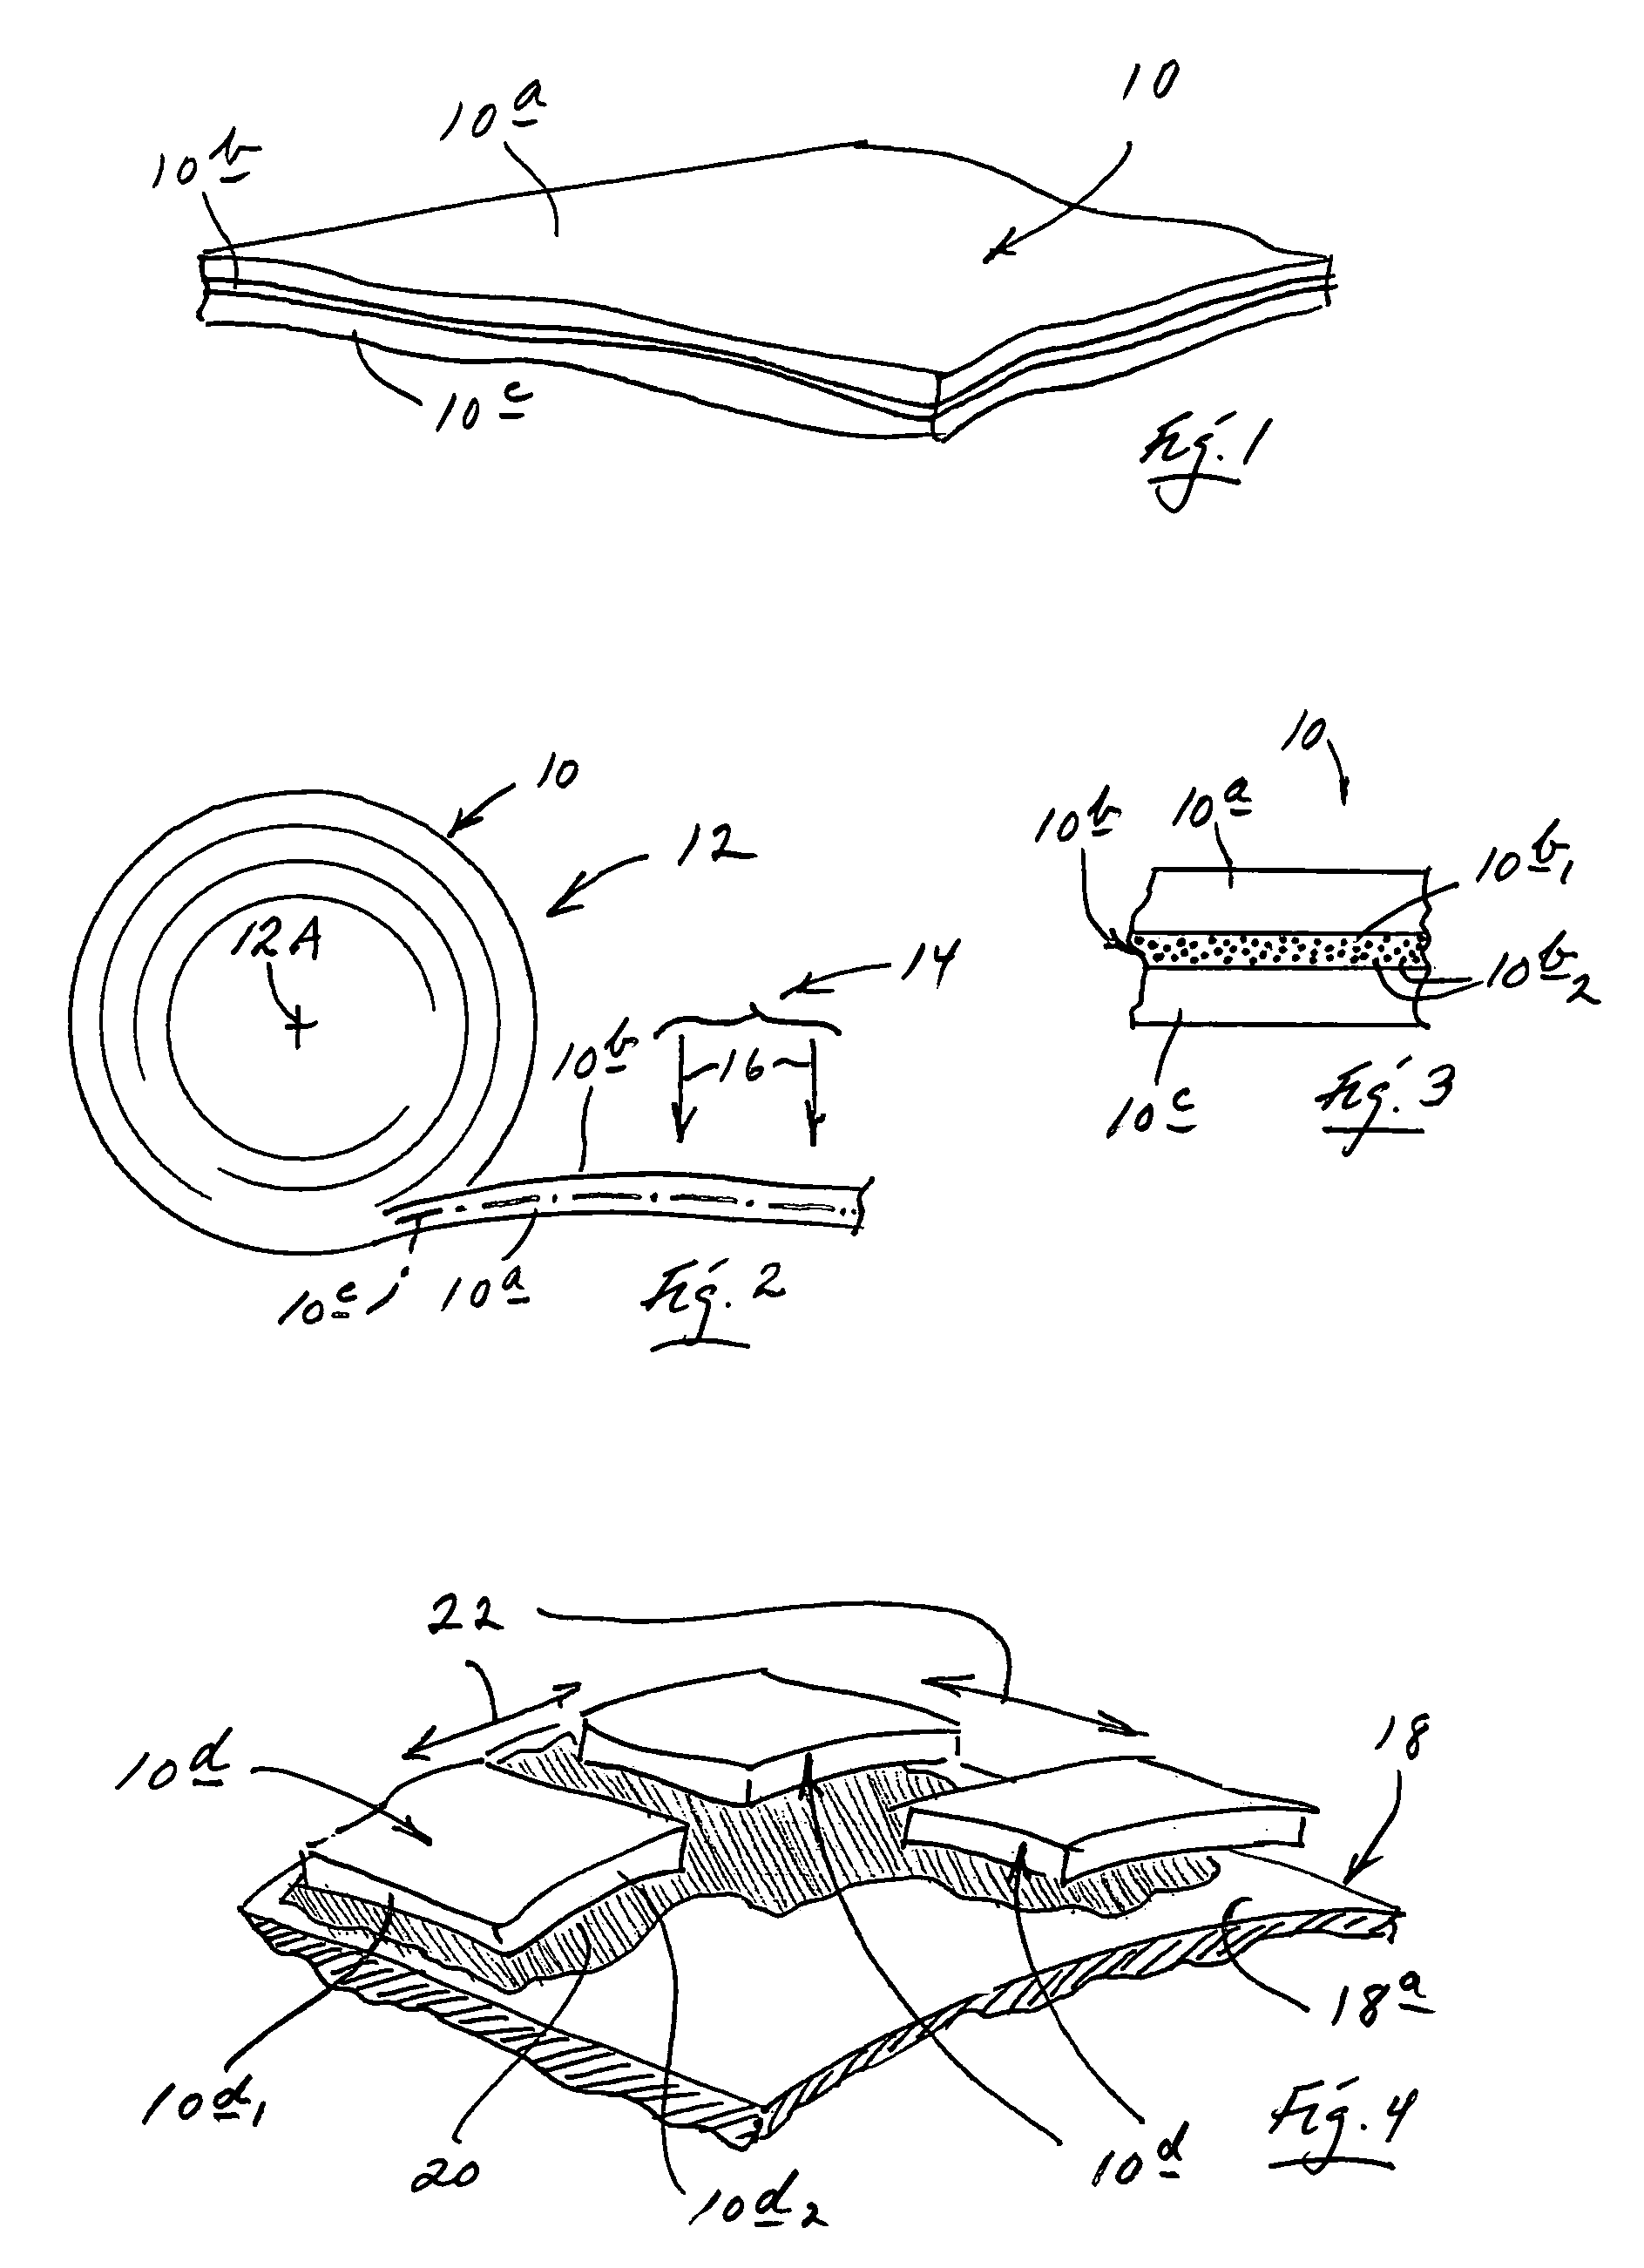 Adhereable, pre-fabricated, self-healing, anti-puncture coating for liquid container and methodology